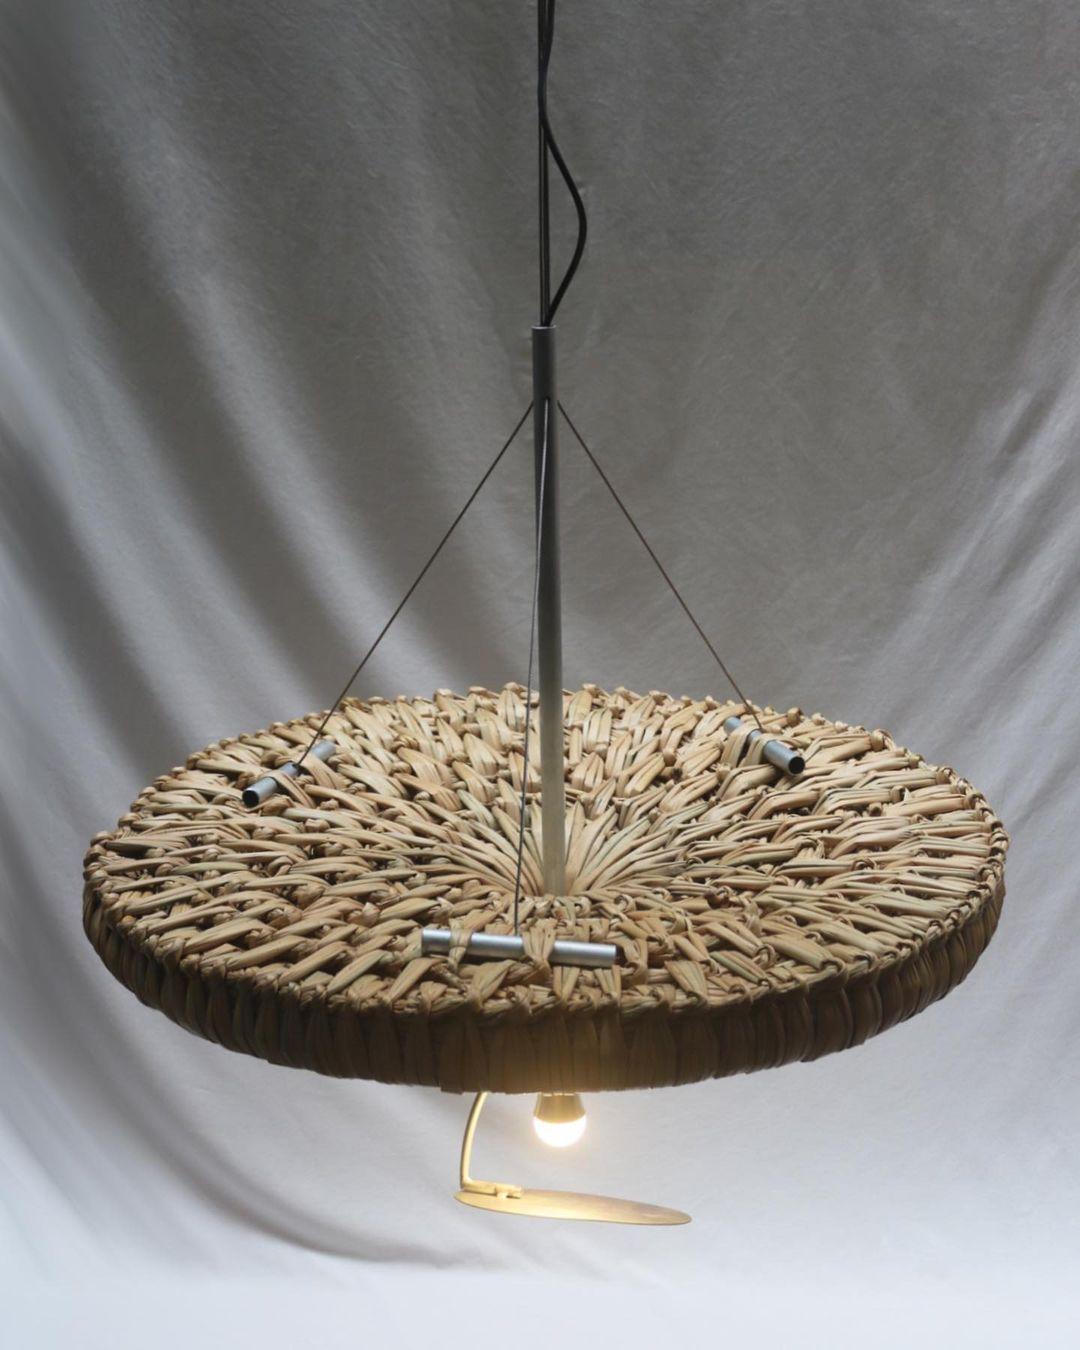 Candeeiro Pendant Lamp by Macheia
Handmade In Portugal.
Dimensions: Ø 80 x H 90 cm.
Materials: Natural dried bulrush and galvanized iron.

Candeeiro represents a play of concepts - to shed a light, literally, to the Bunho technique. Unconventionally